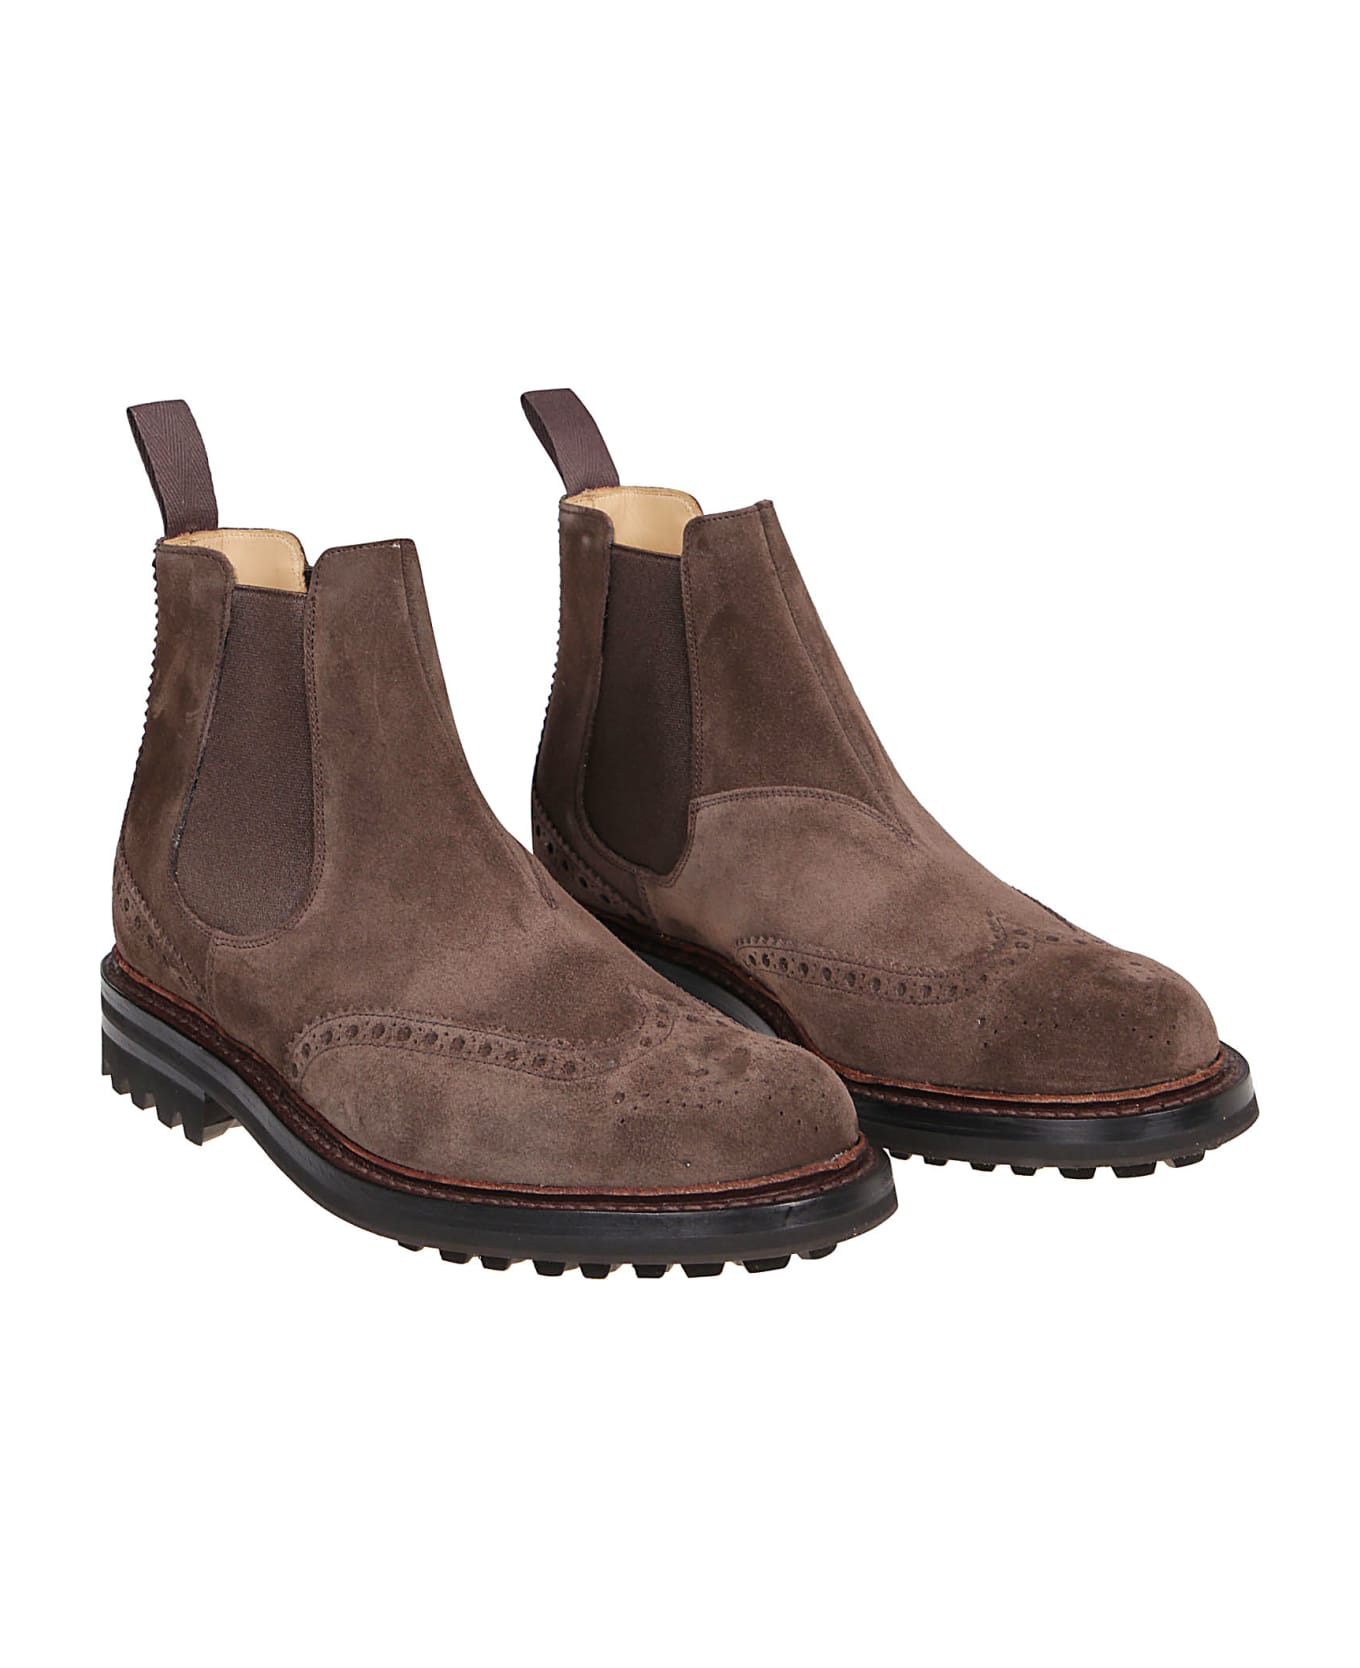 Church's Ankle Boots Mc Entyre Lw - Aad Brown